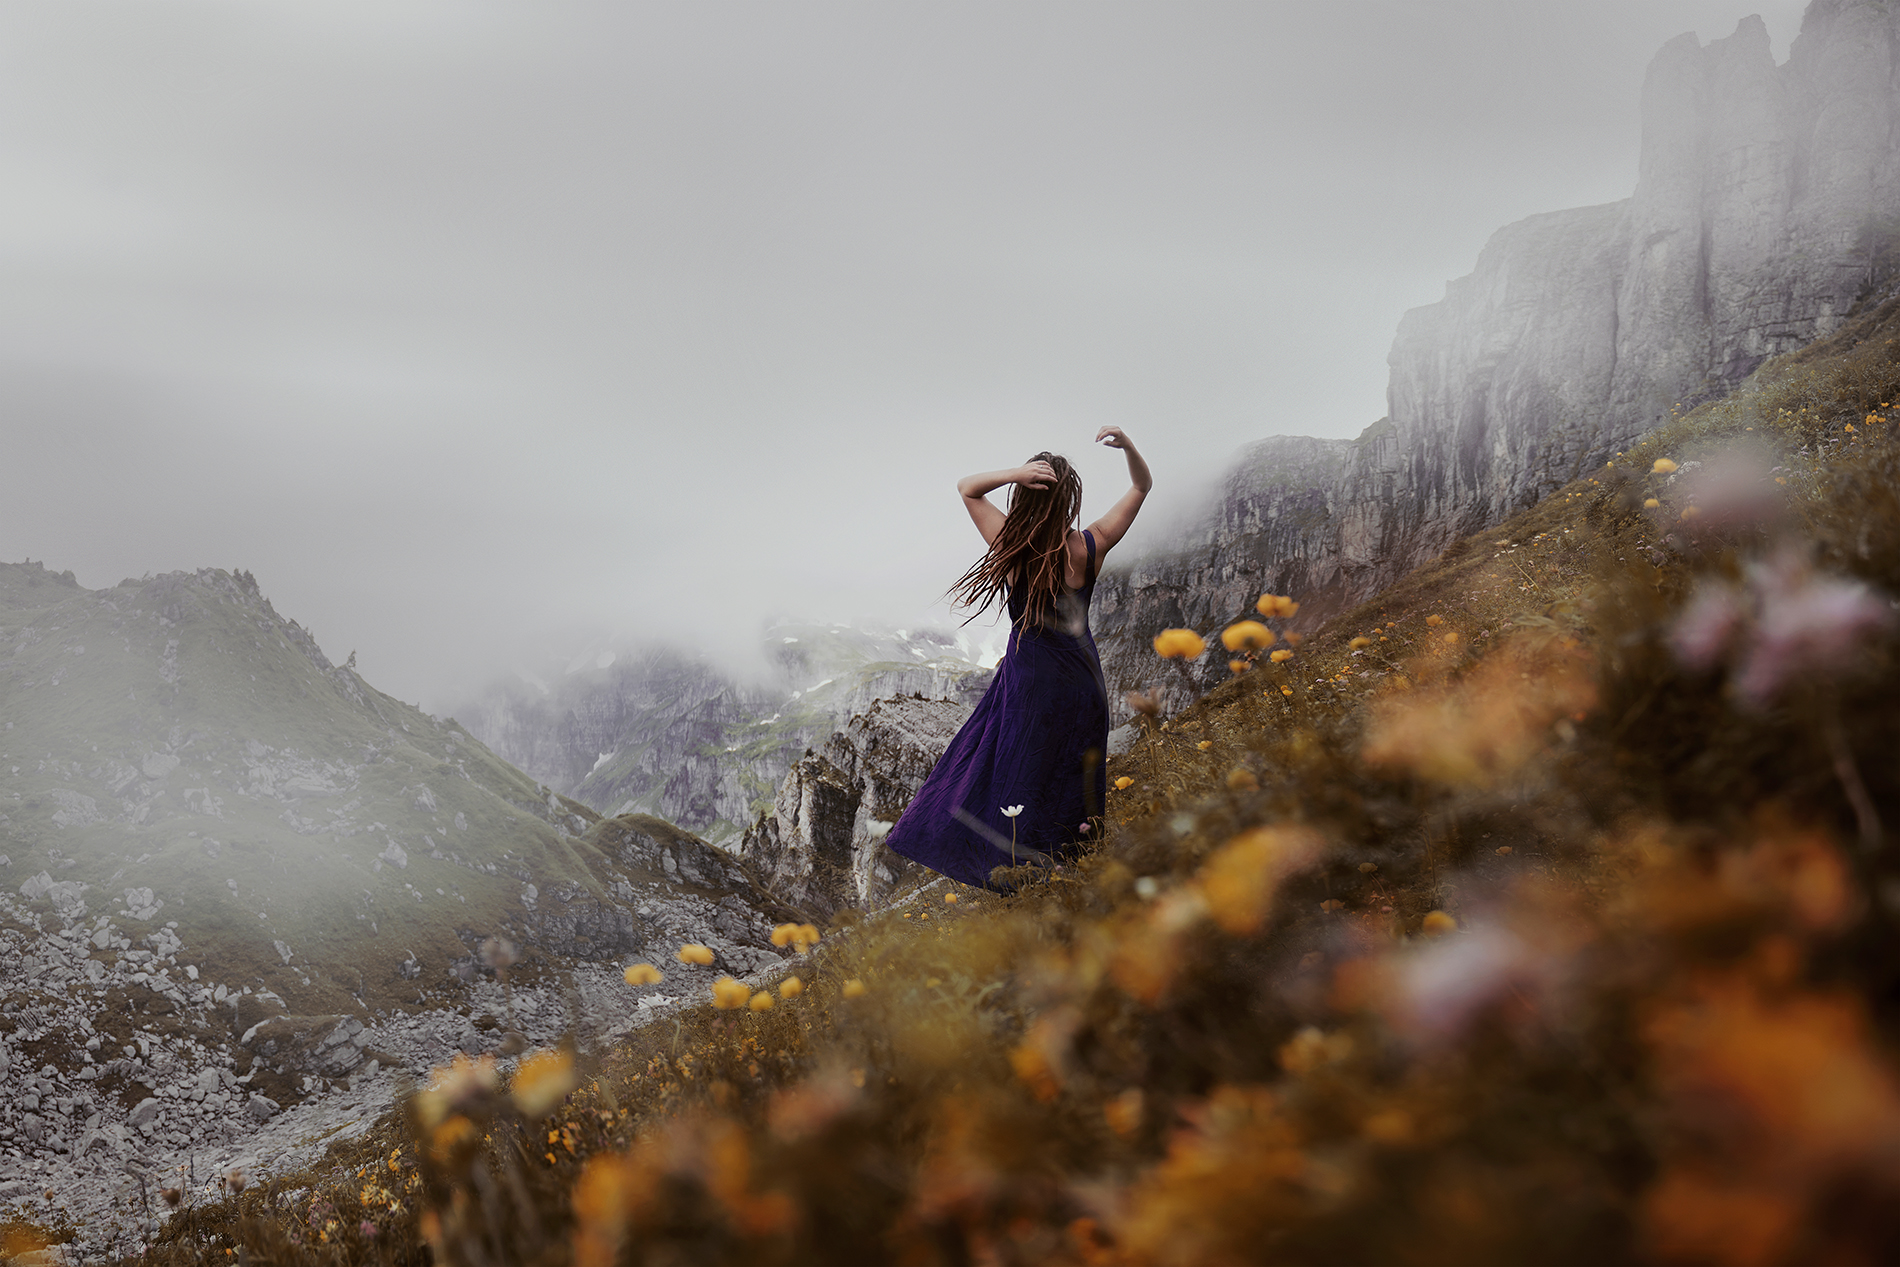 Artistic self portrait photography is a way of creative expression. This self-portrait by Anna Heimkreiter features a woman in a long dress standing in a beautiful mountain scenery. Her dress and hair flow with the wind, creating an ethereal atmosphere.